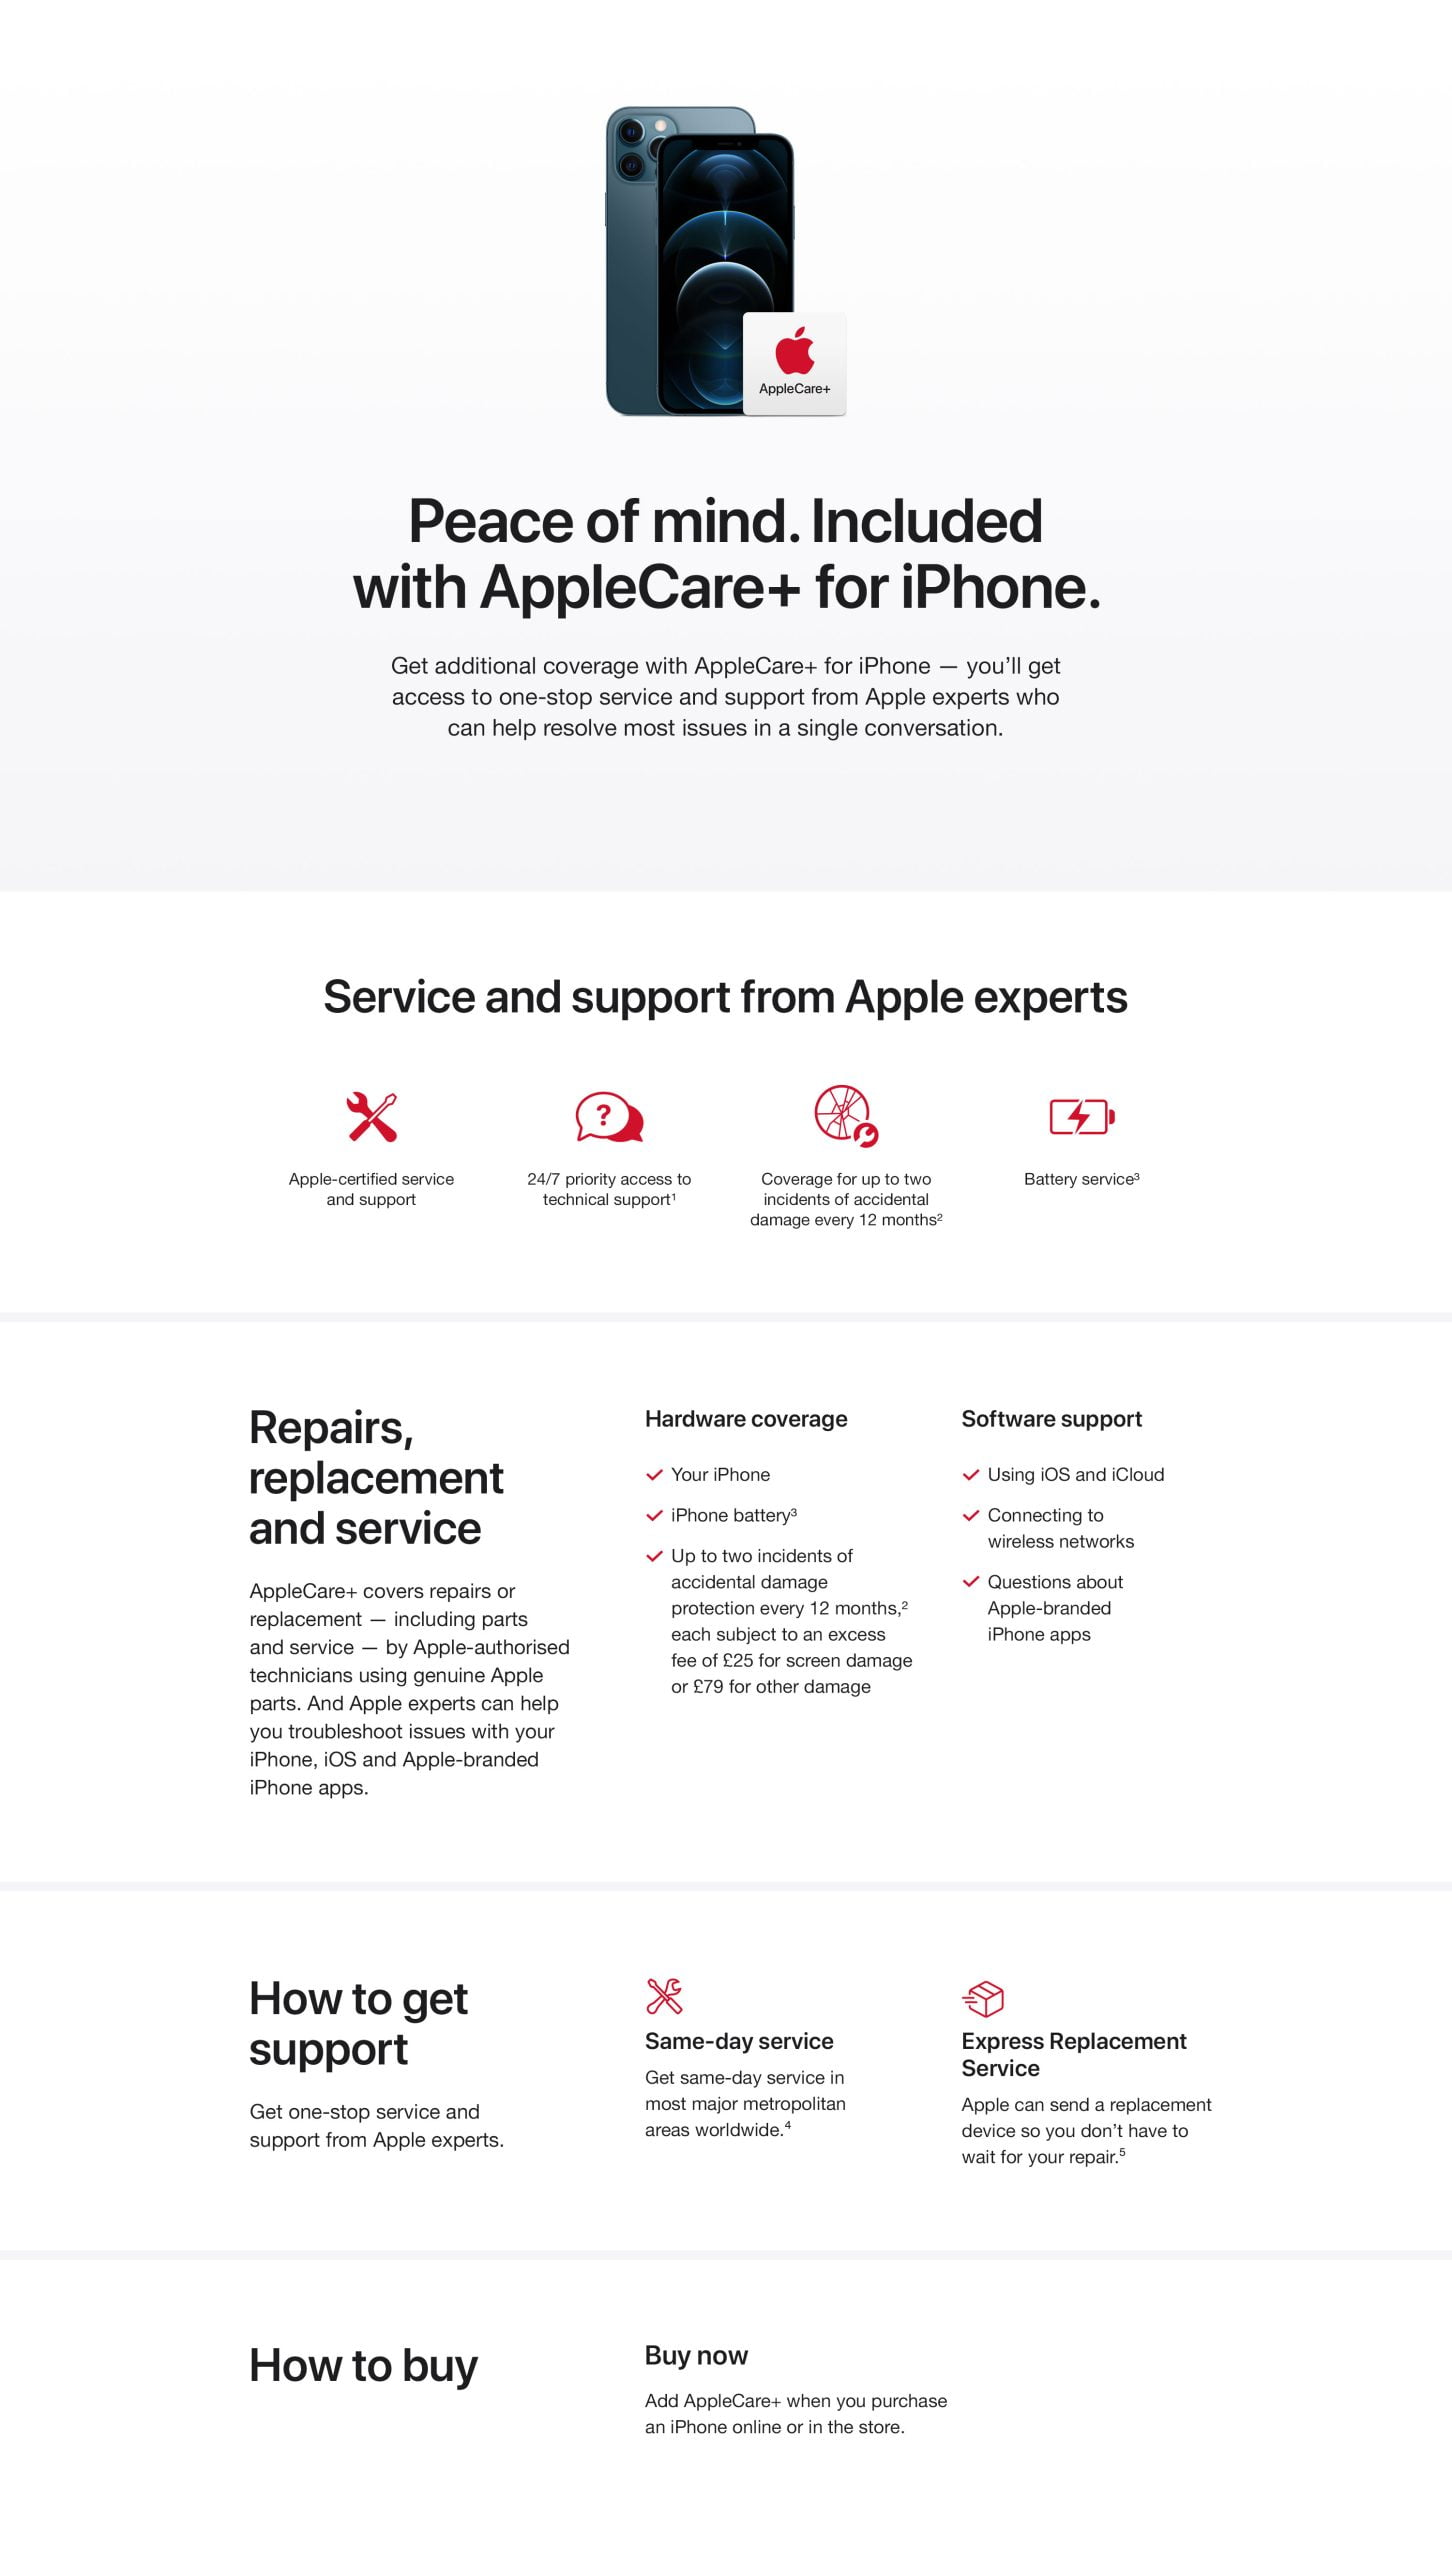 AppleCare+ is about to arrive in Spain